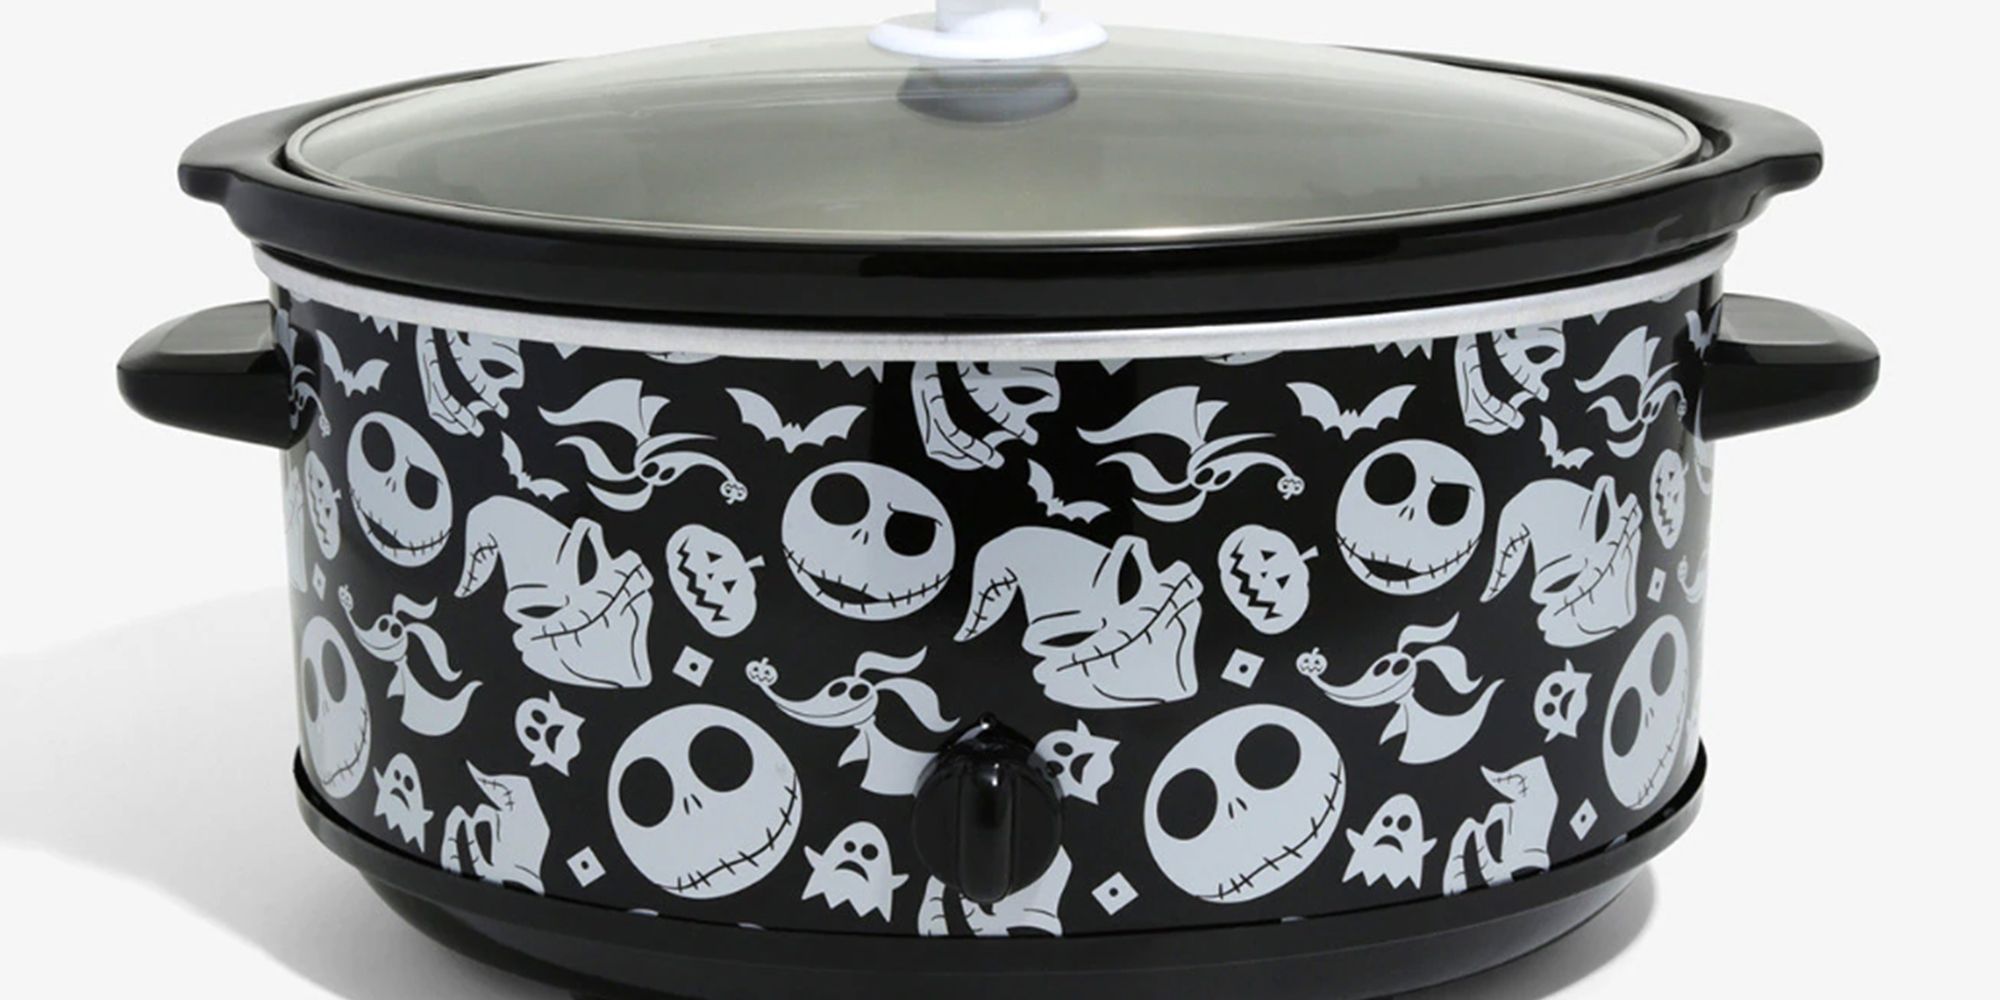 The Nightmare Before Christmas 7 Quart Slow Cooker 